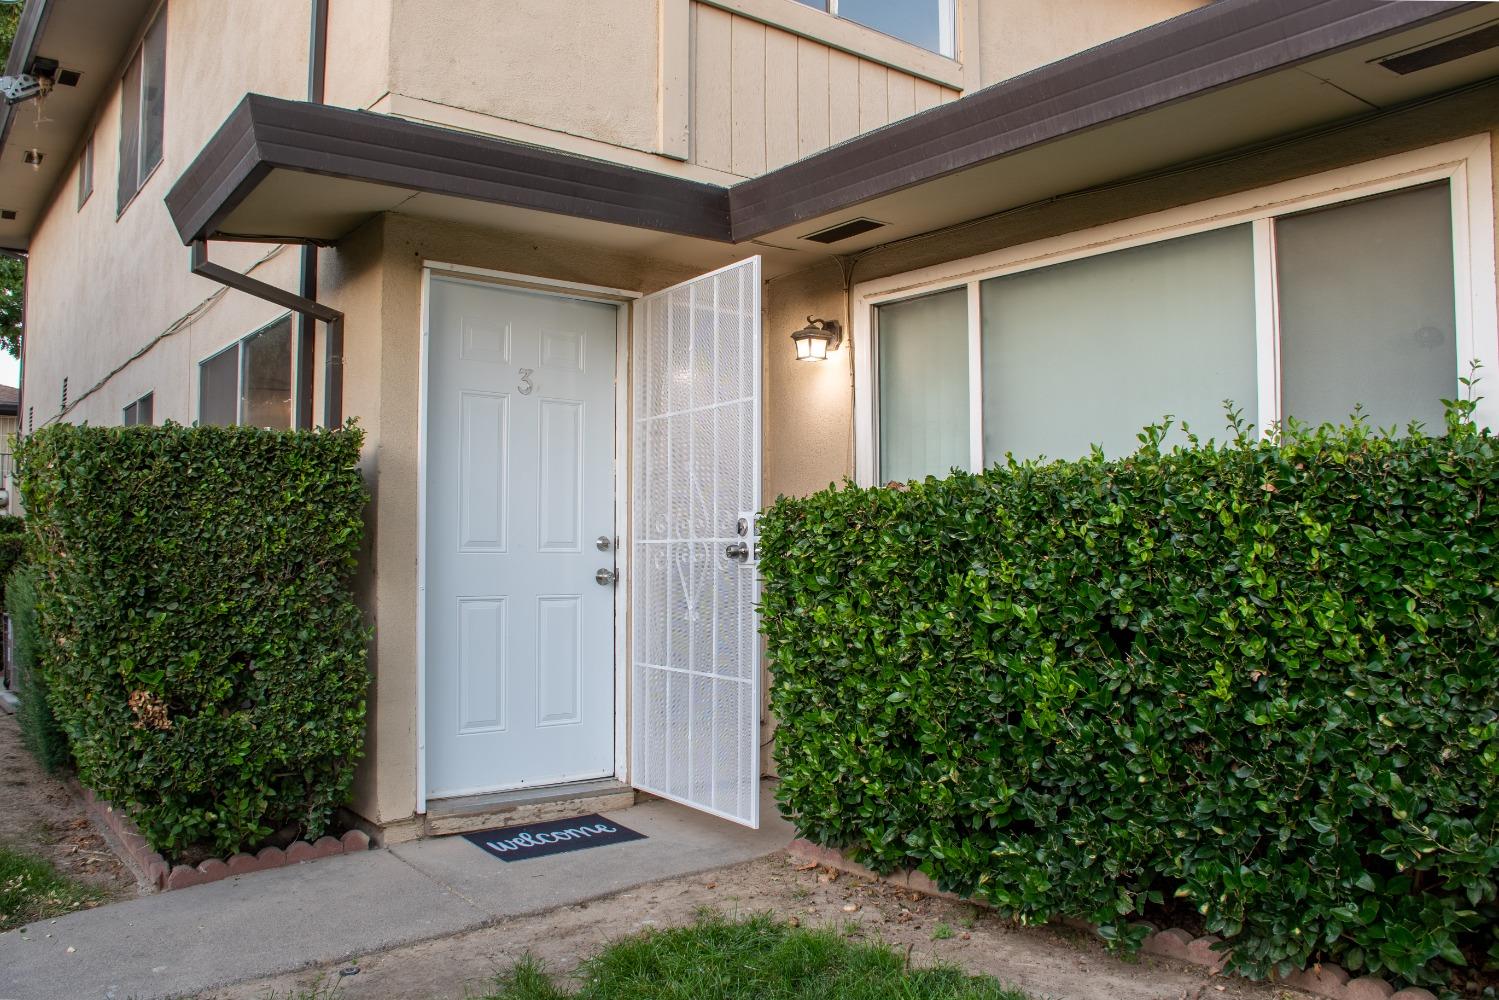 Photo of 4521 Palm Ave #3 in Sacramento, CA